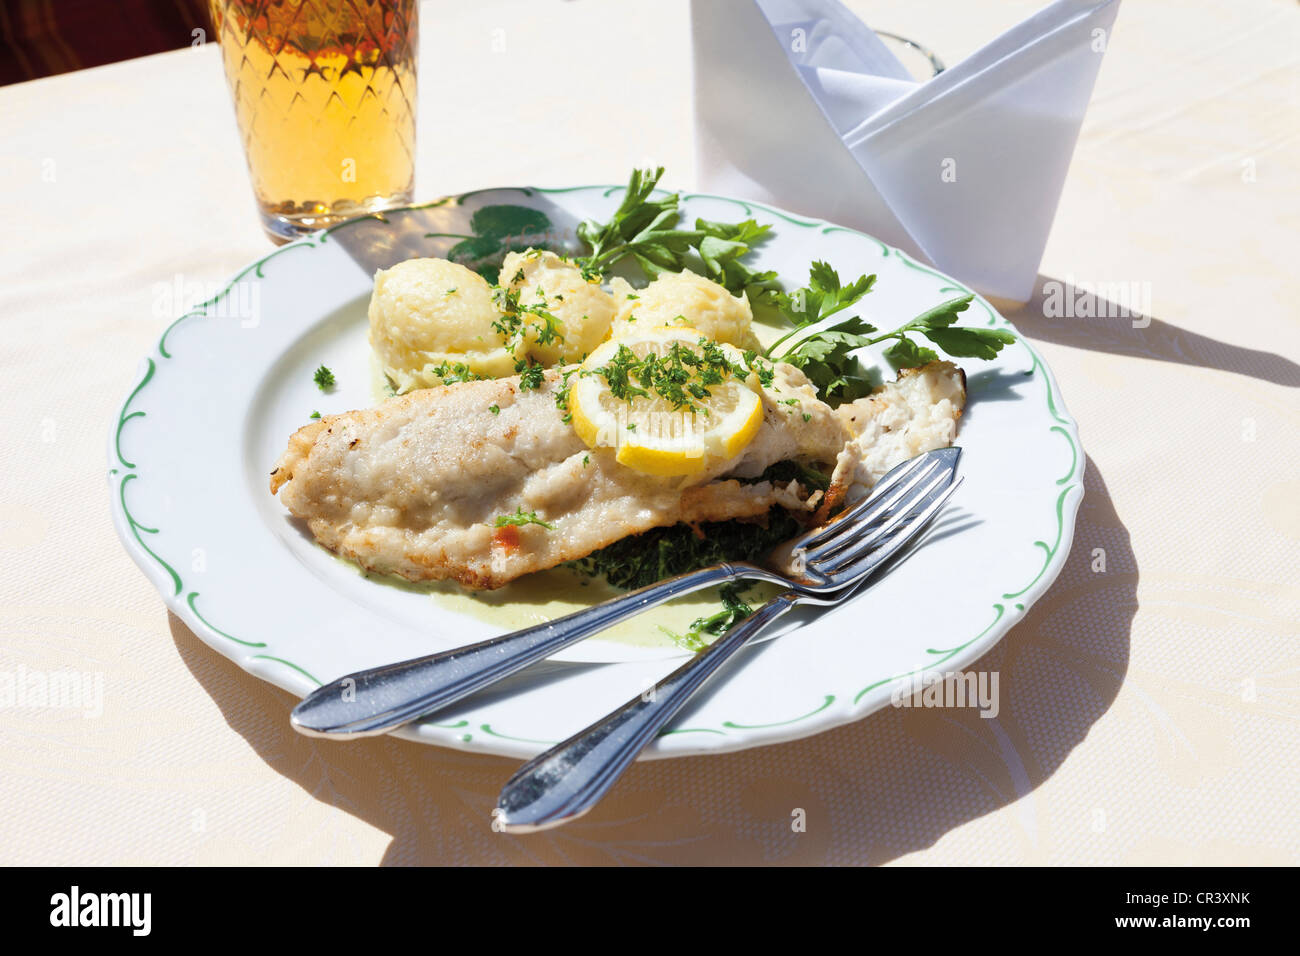 Fried pikeperch with mashed potatoes and spinach Stock Photo